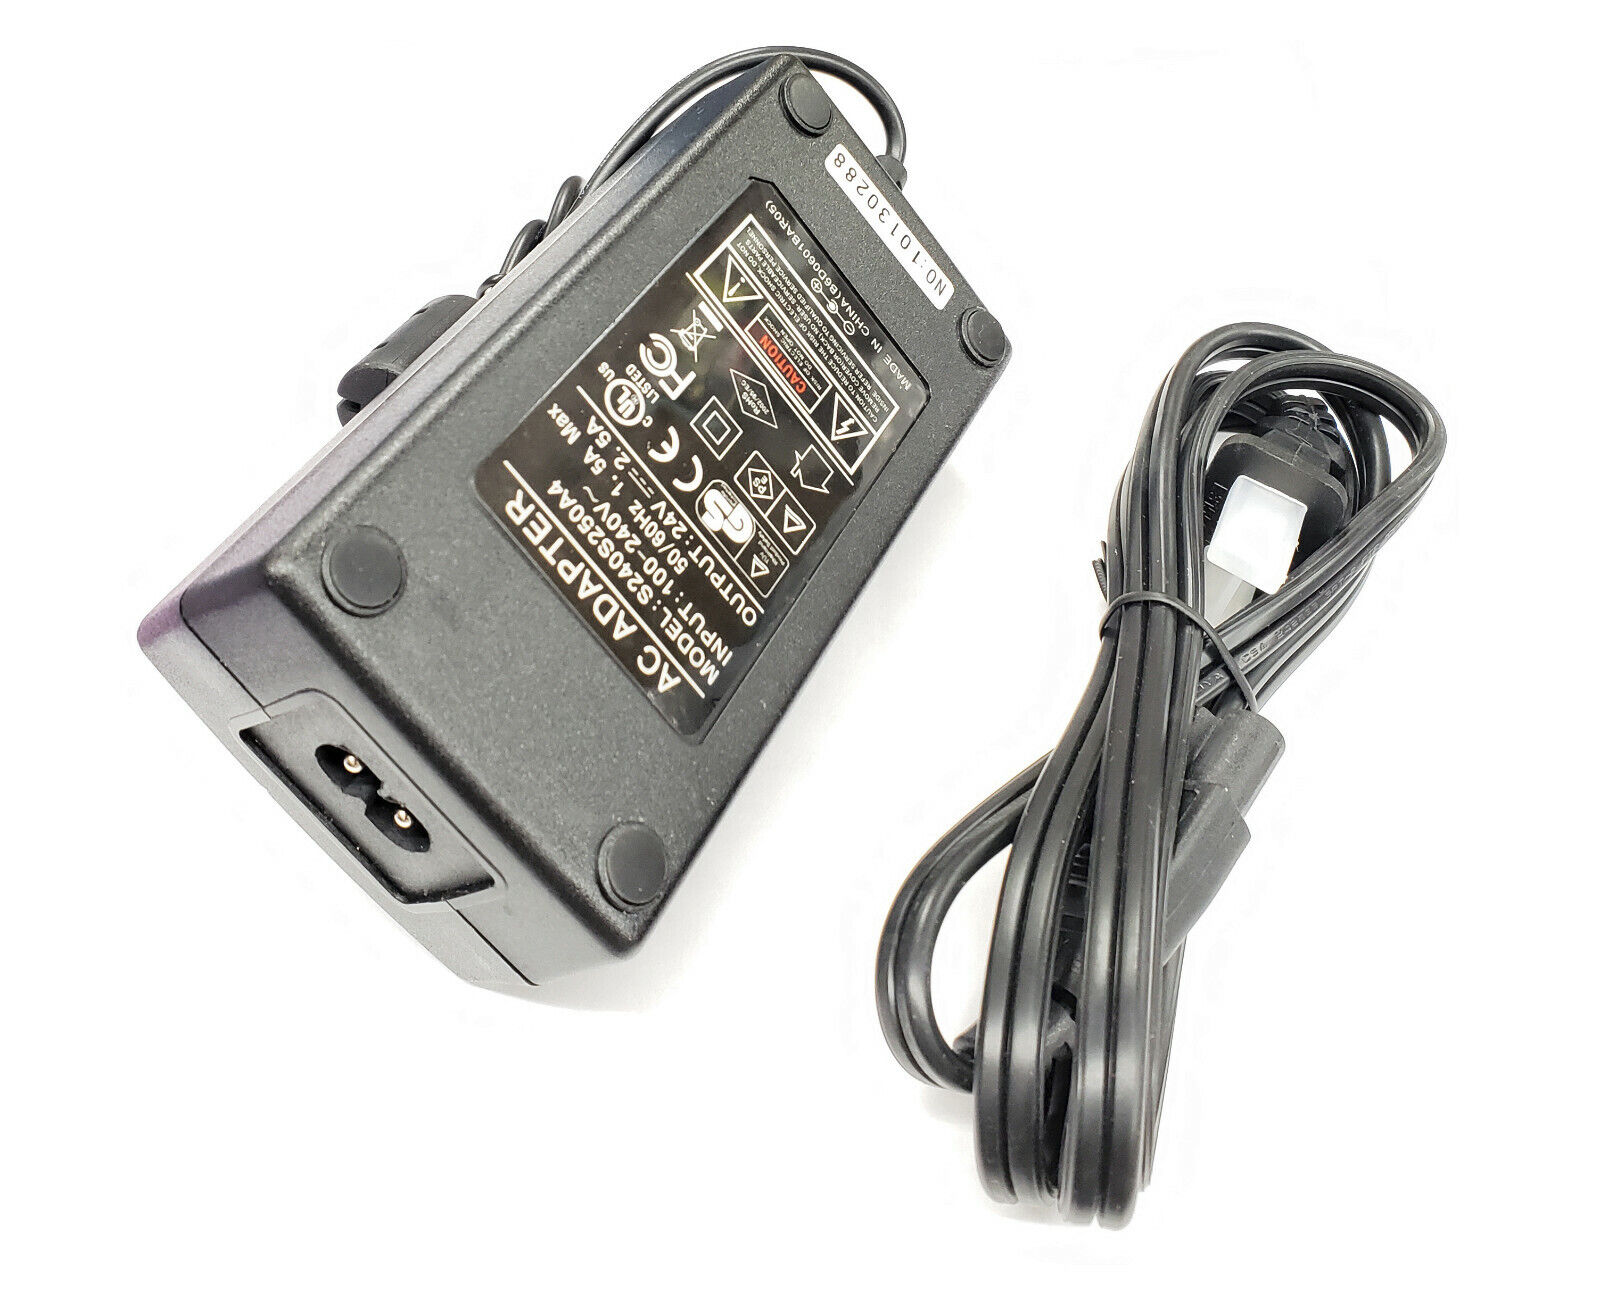 New 24V AC Adapter For DYMO LabelWriter 450 Twin Turbo Thermal Printer-175160 